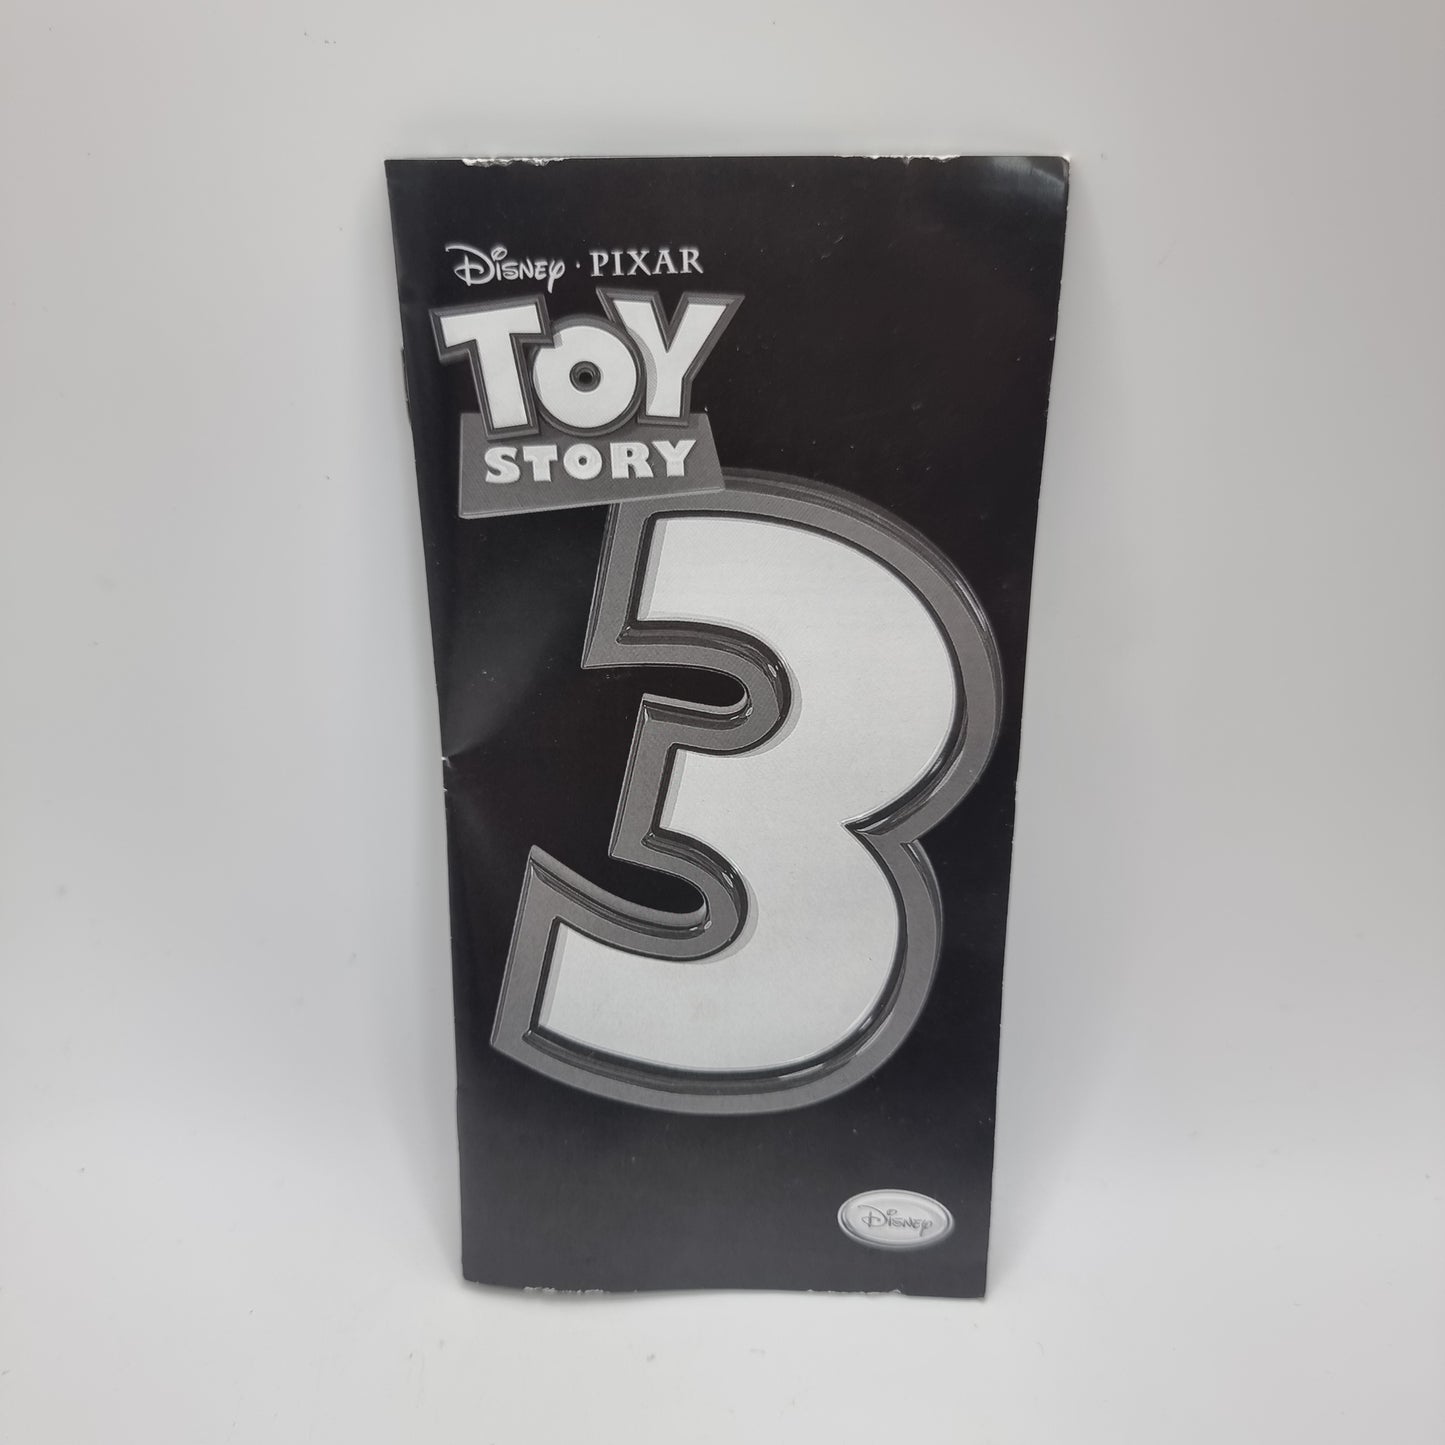 Toy Story 3 PSP Game